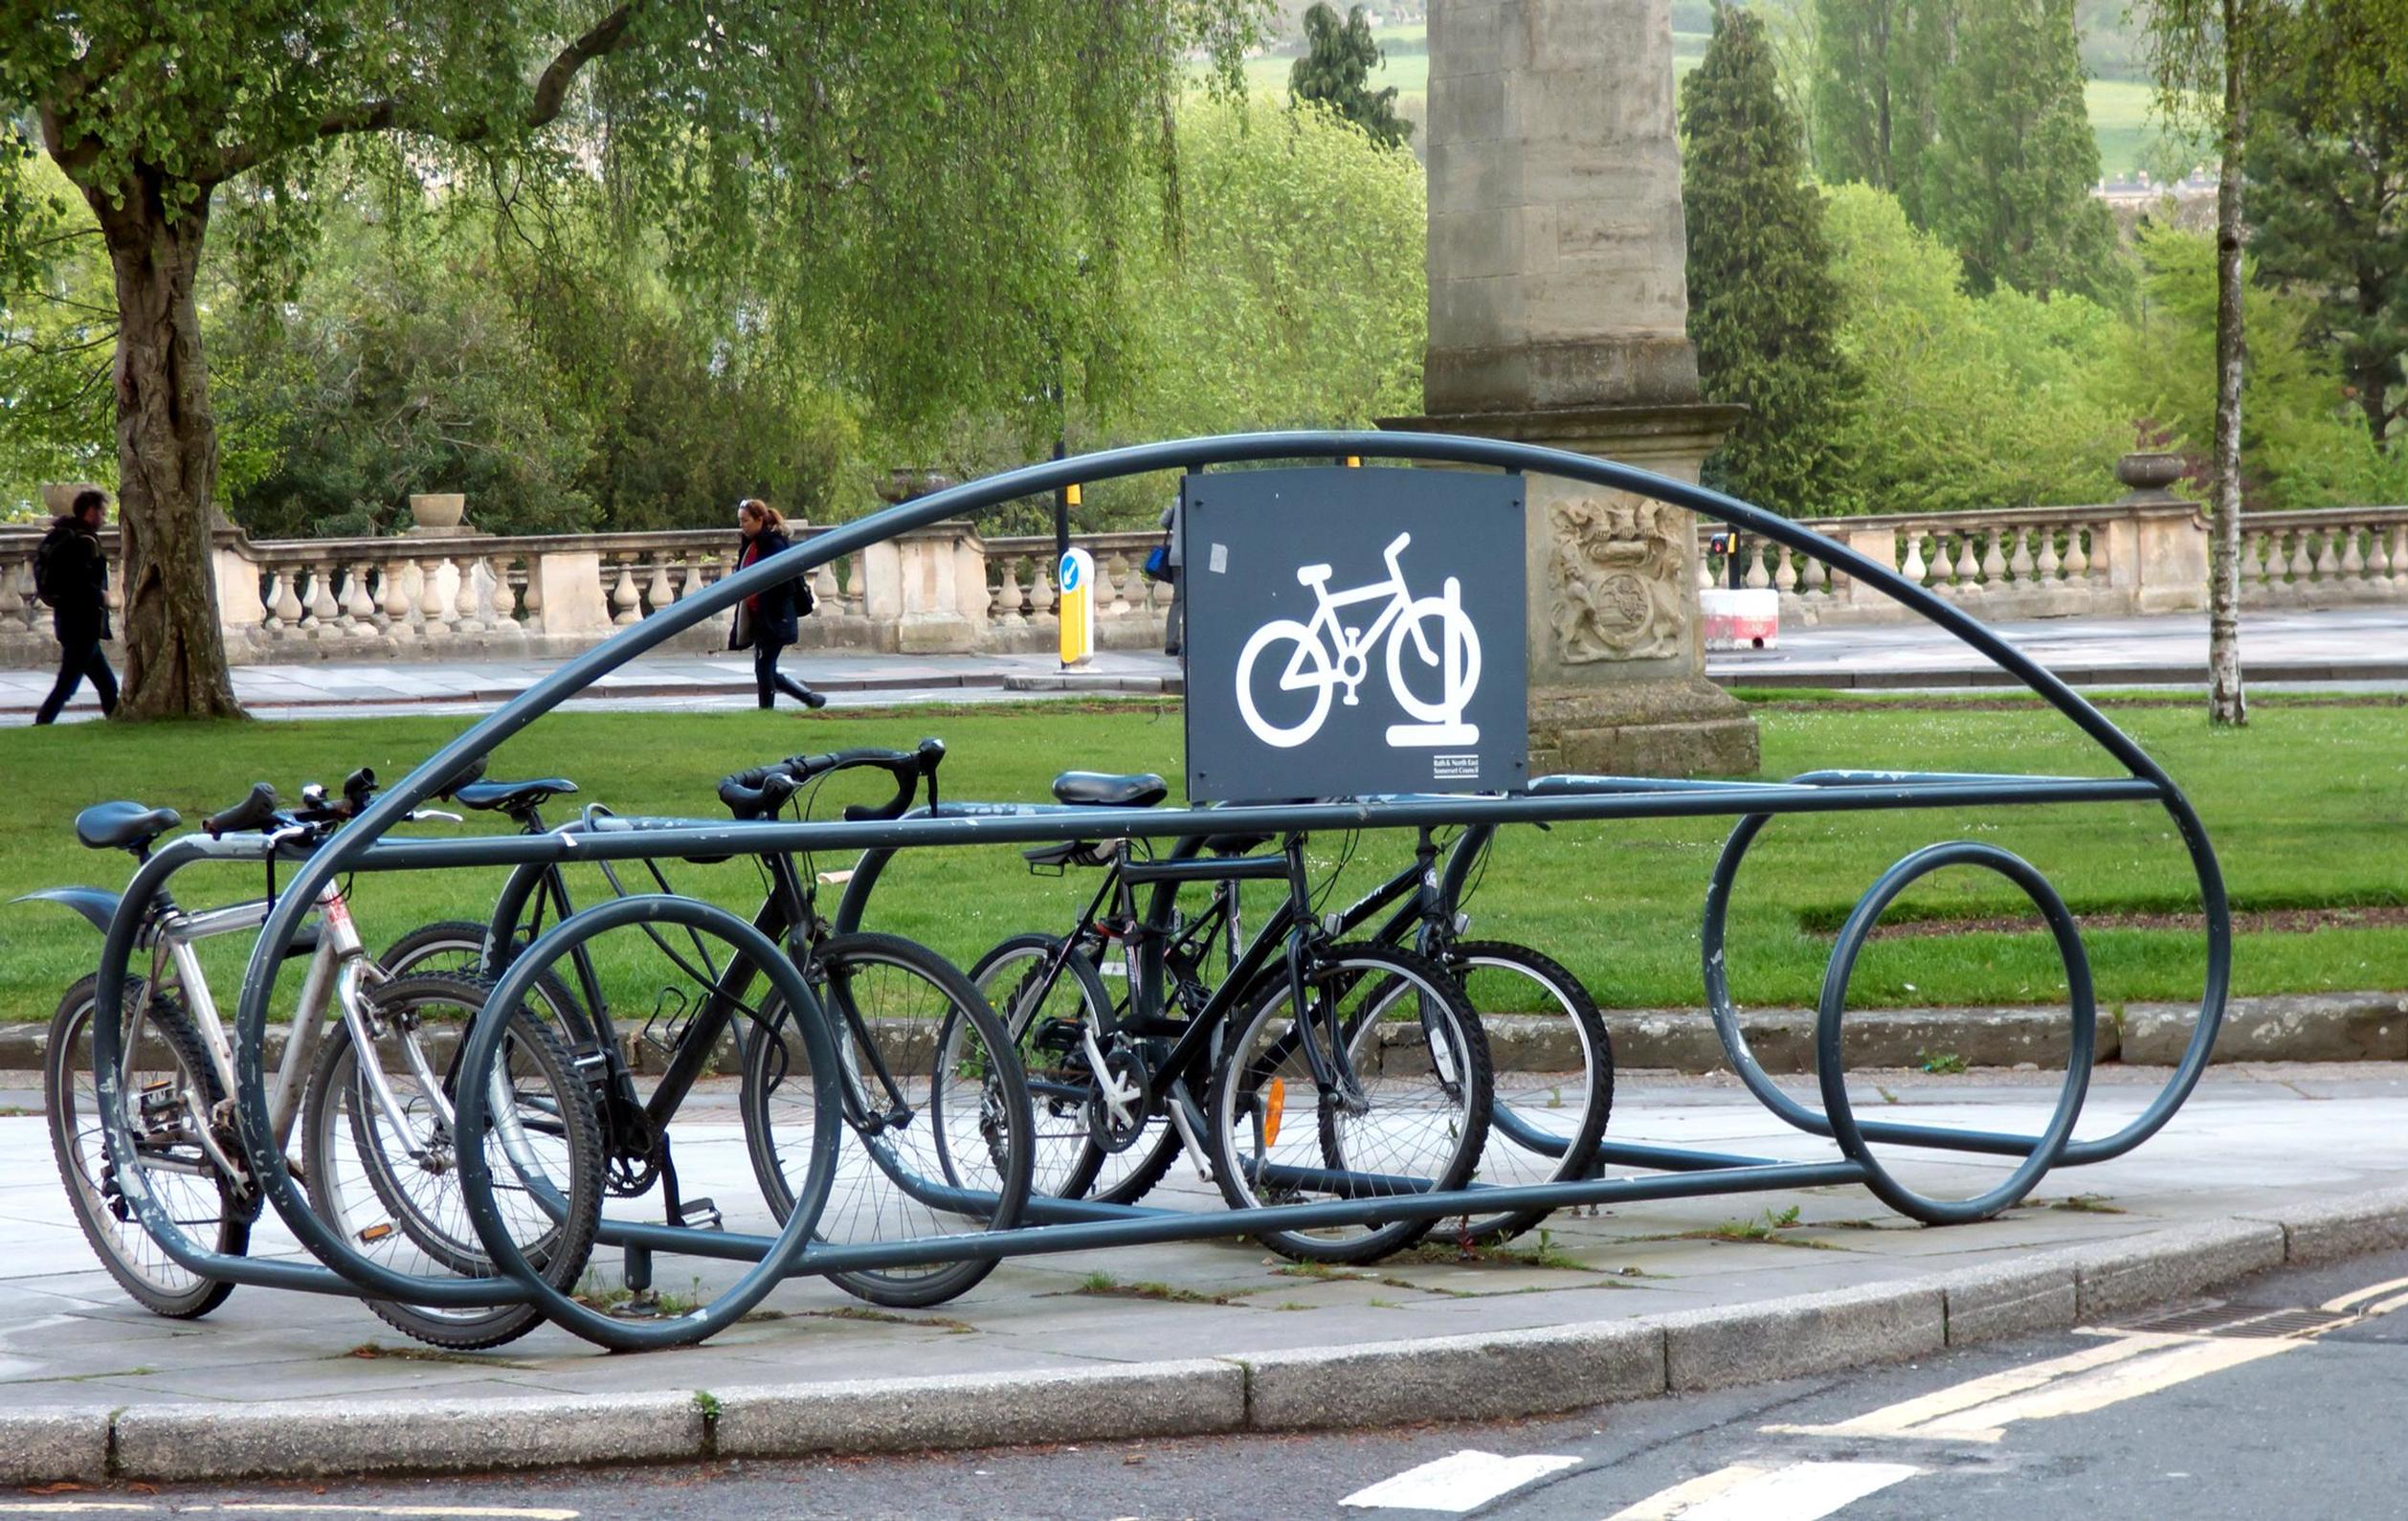 The standard is intended to raise the quality of cycle parking, and reduce bike thefts